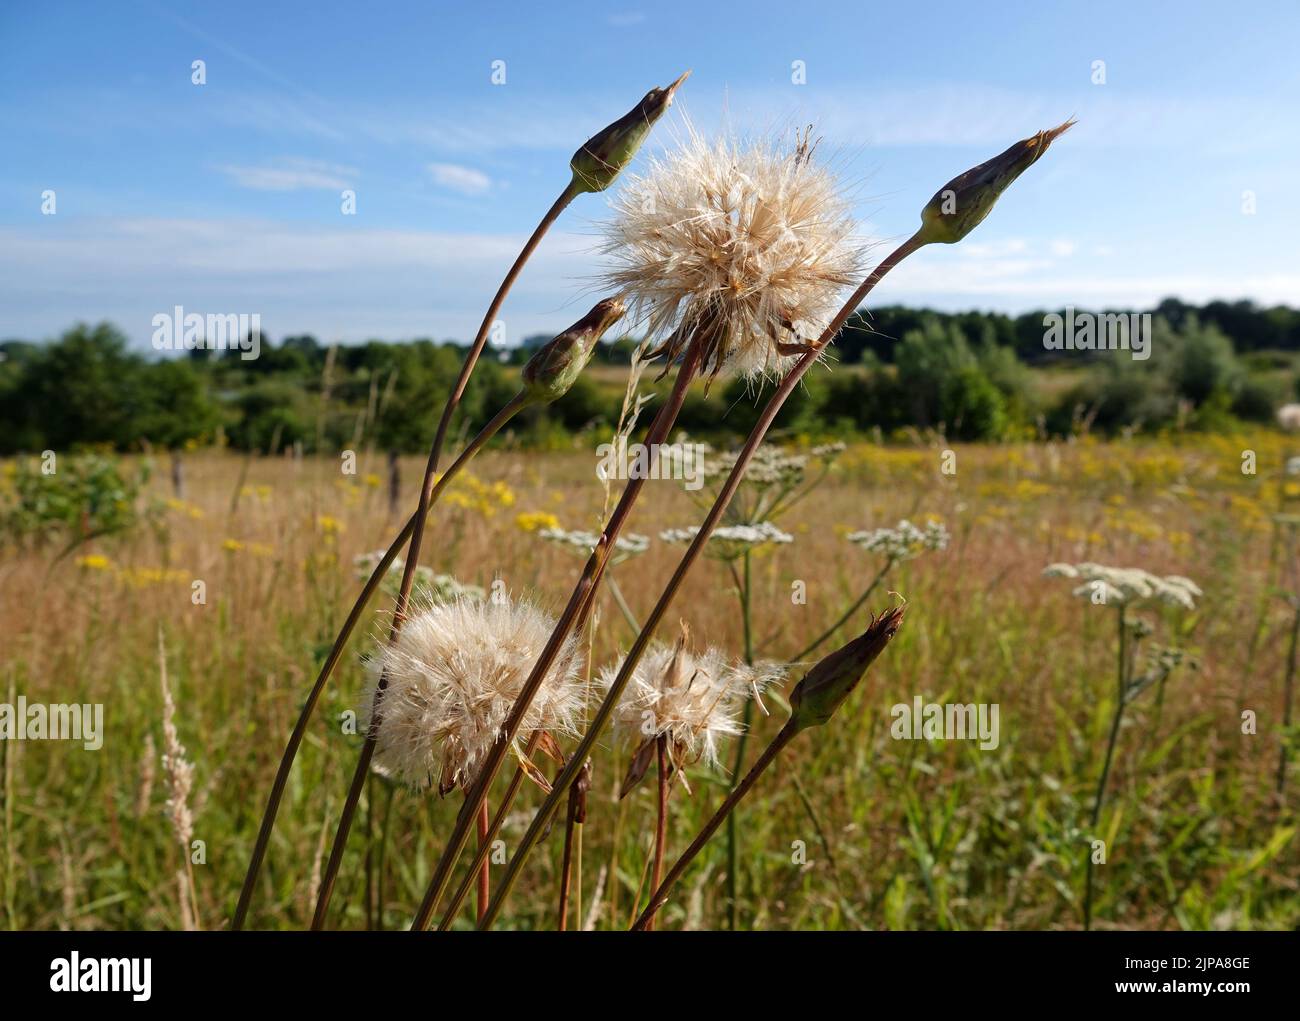 The seed umbrellas of a meadow salsify or Tragopogon pratensis plant are blowing in the wind Stock Photo